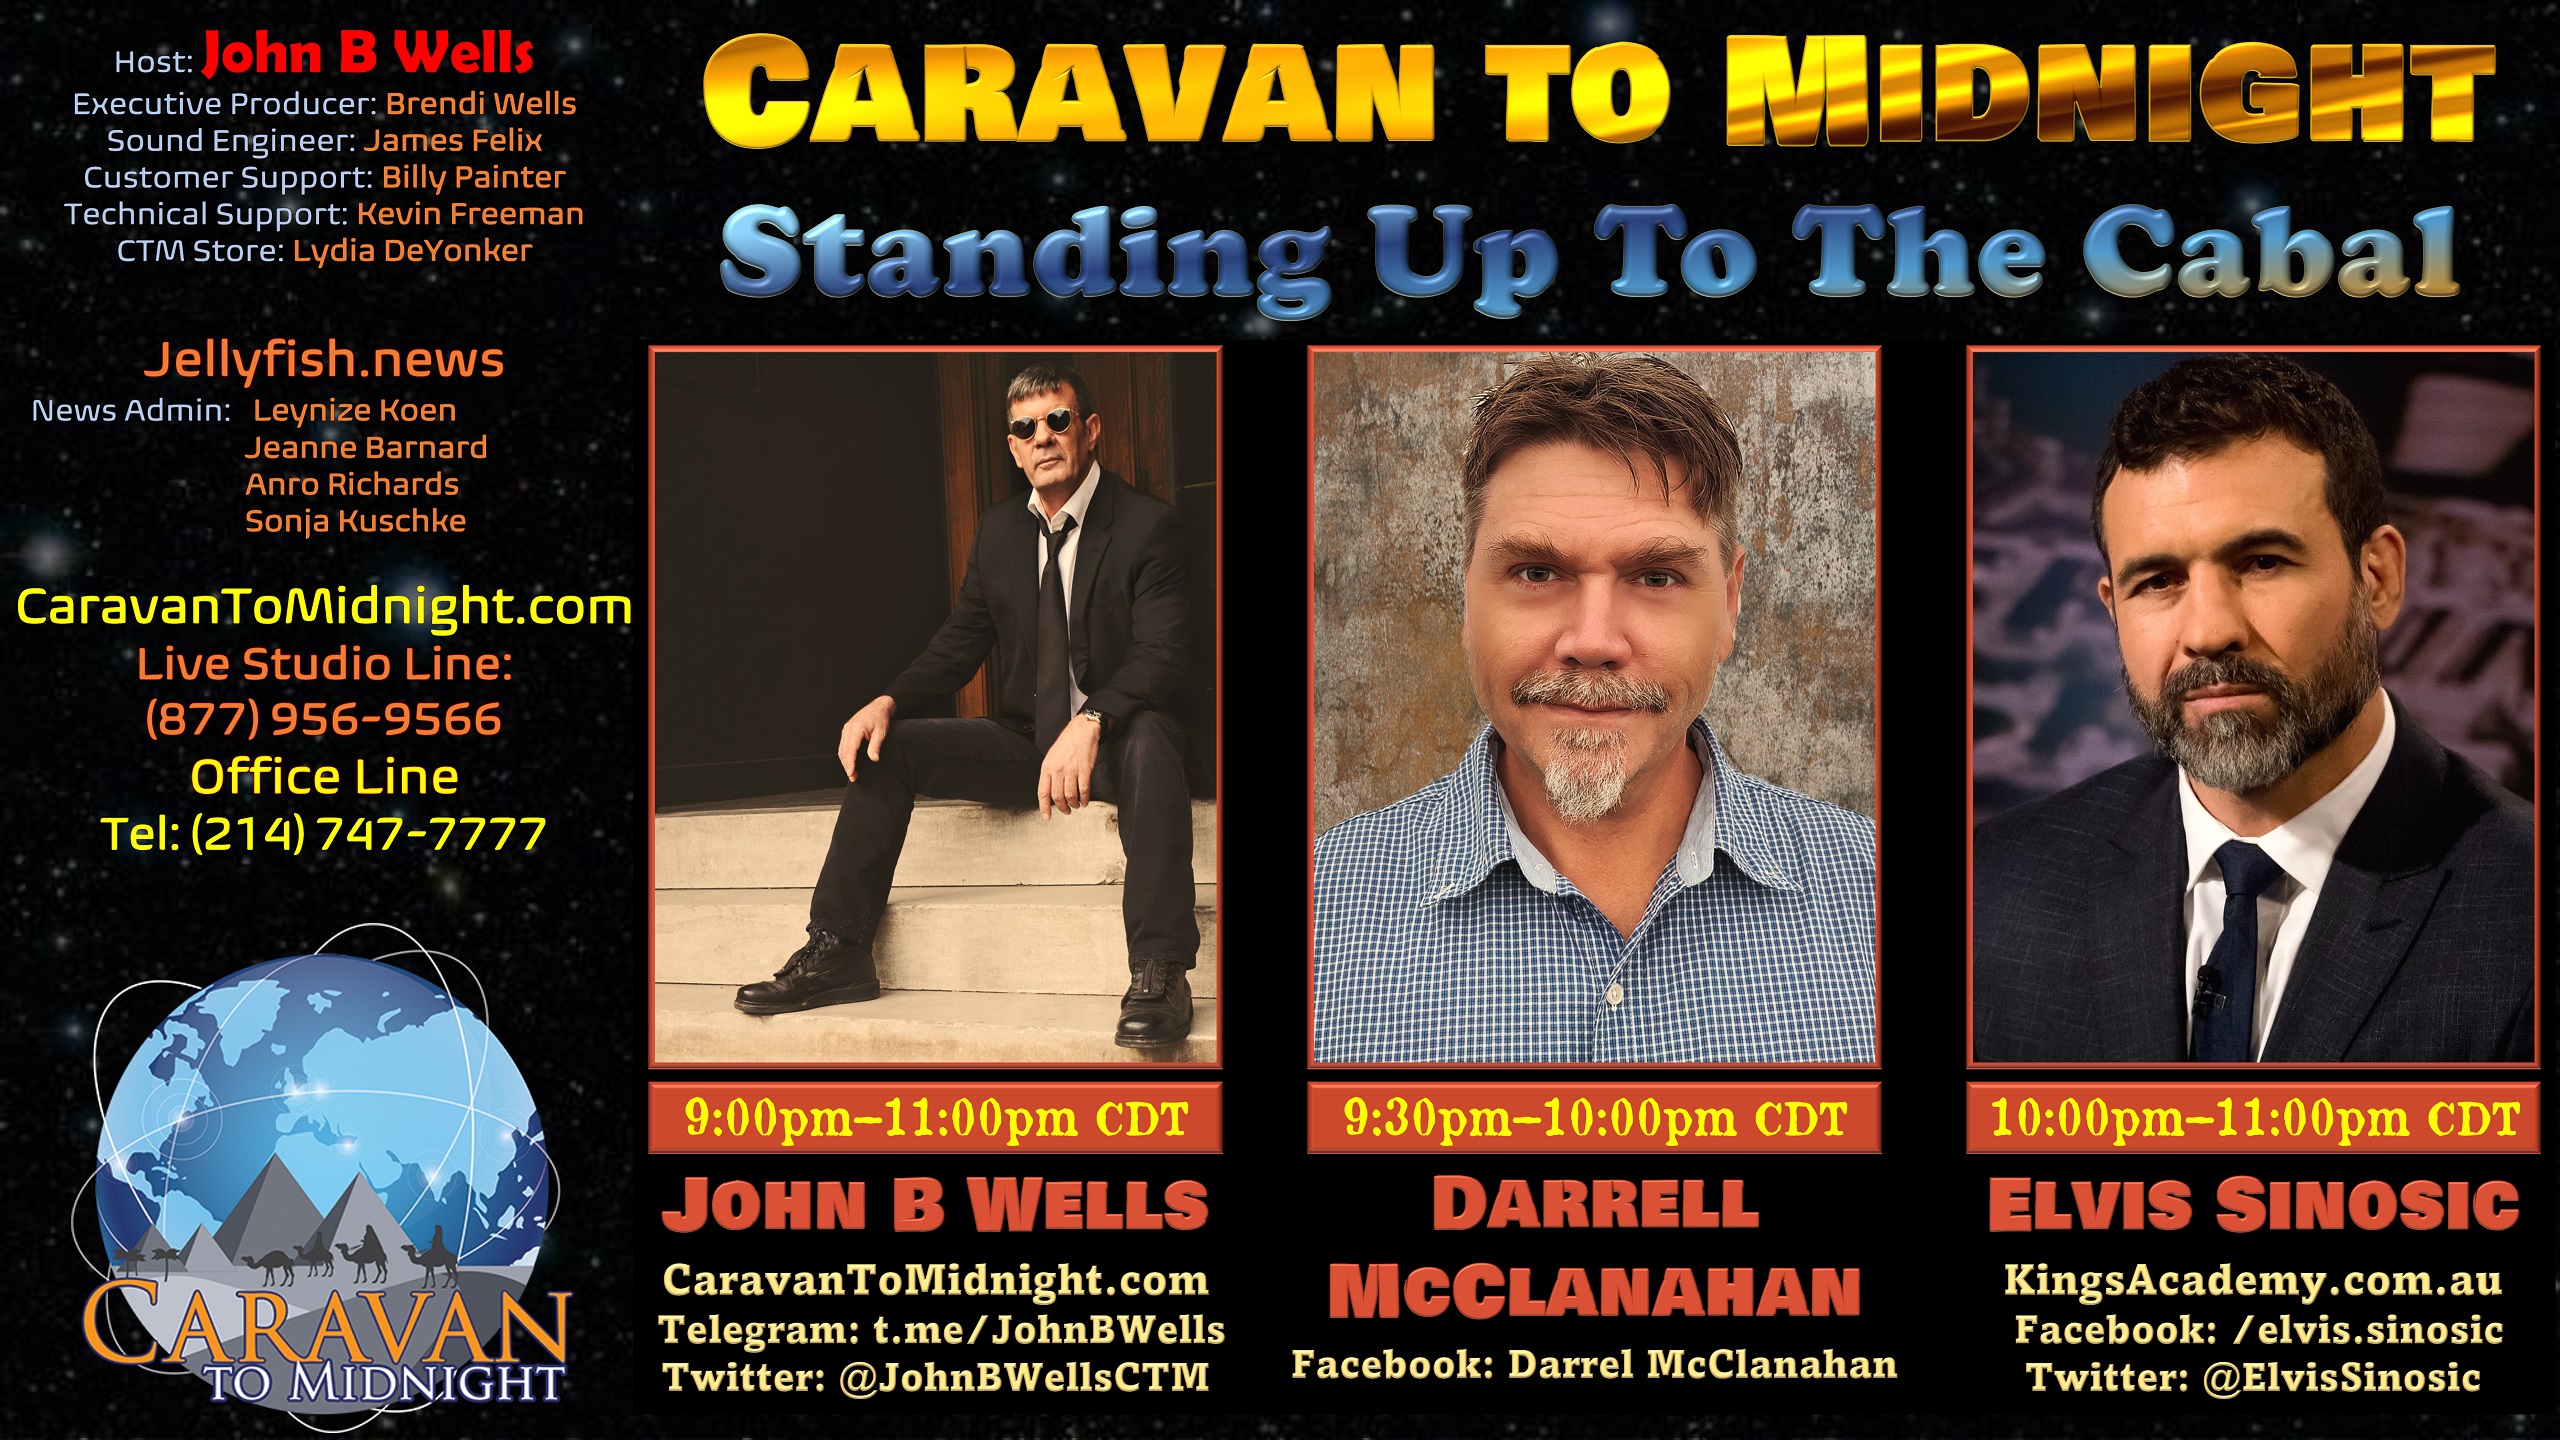 01 August 2022 - Caravan To Midnight - Standing Up to The Cabal